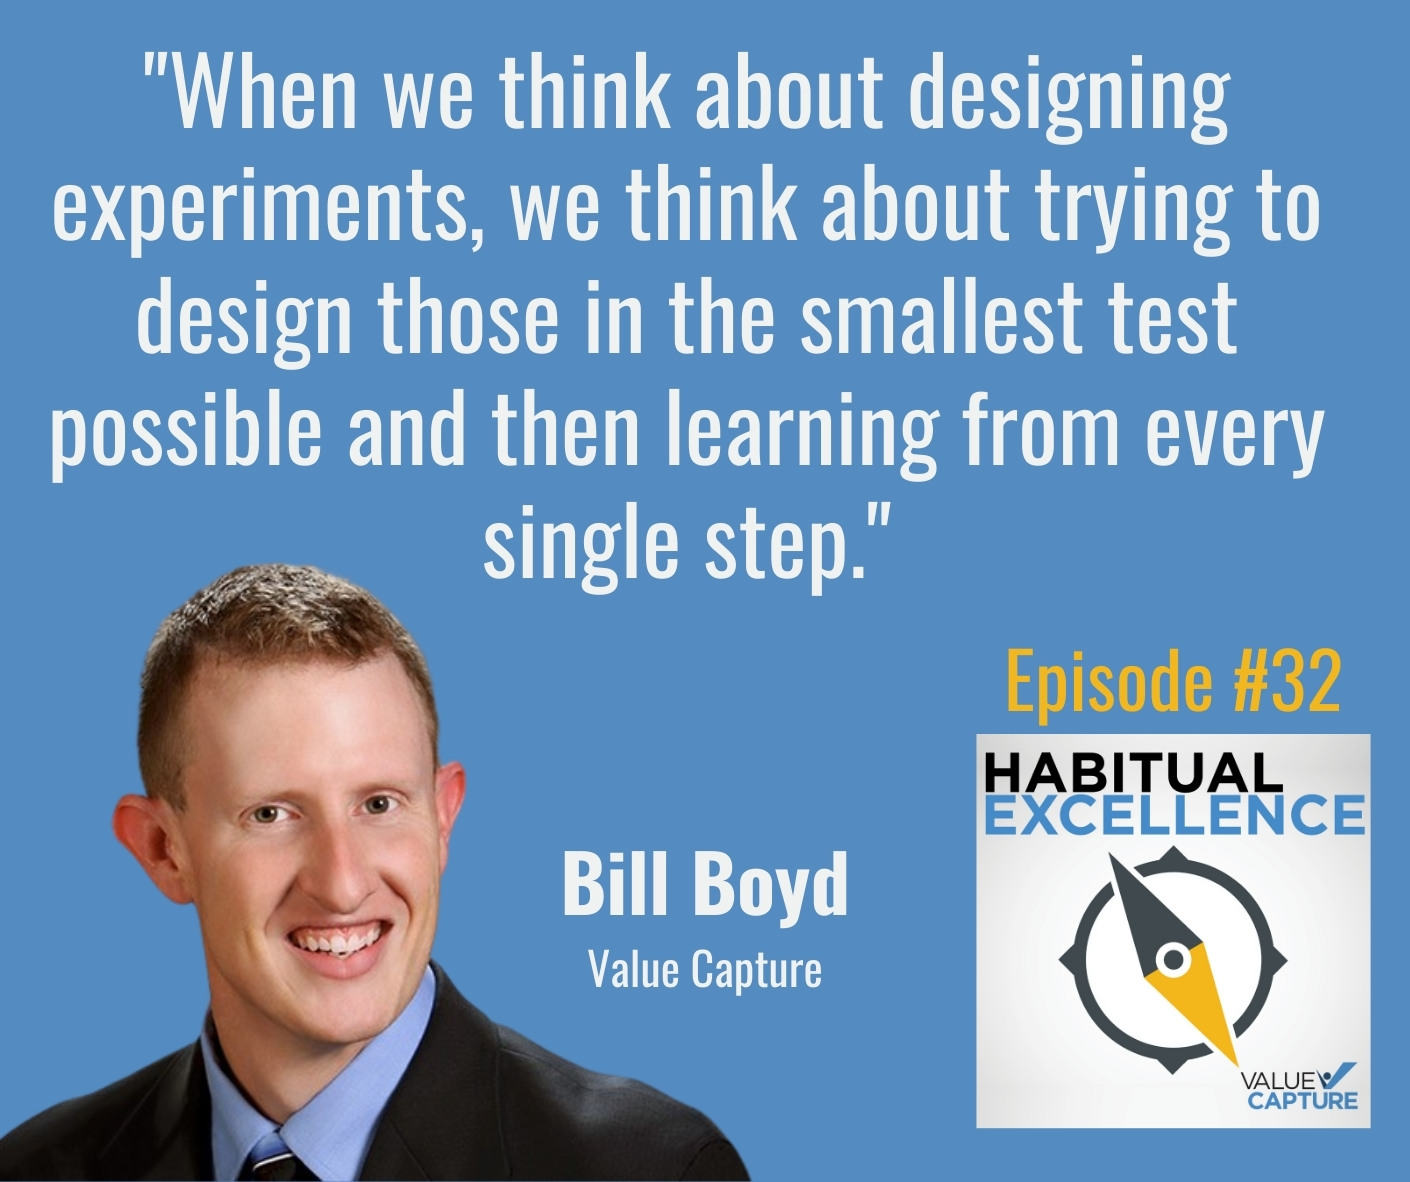 "When we think about designing experiments, we think about trying to design those in the smallest test possible and then learning from every single step."